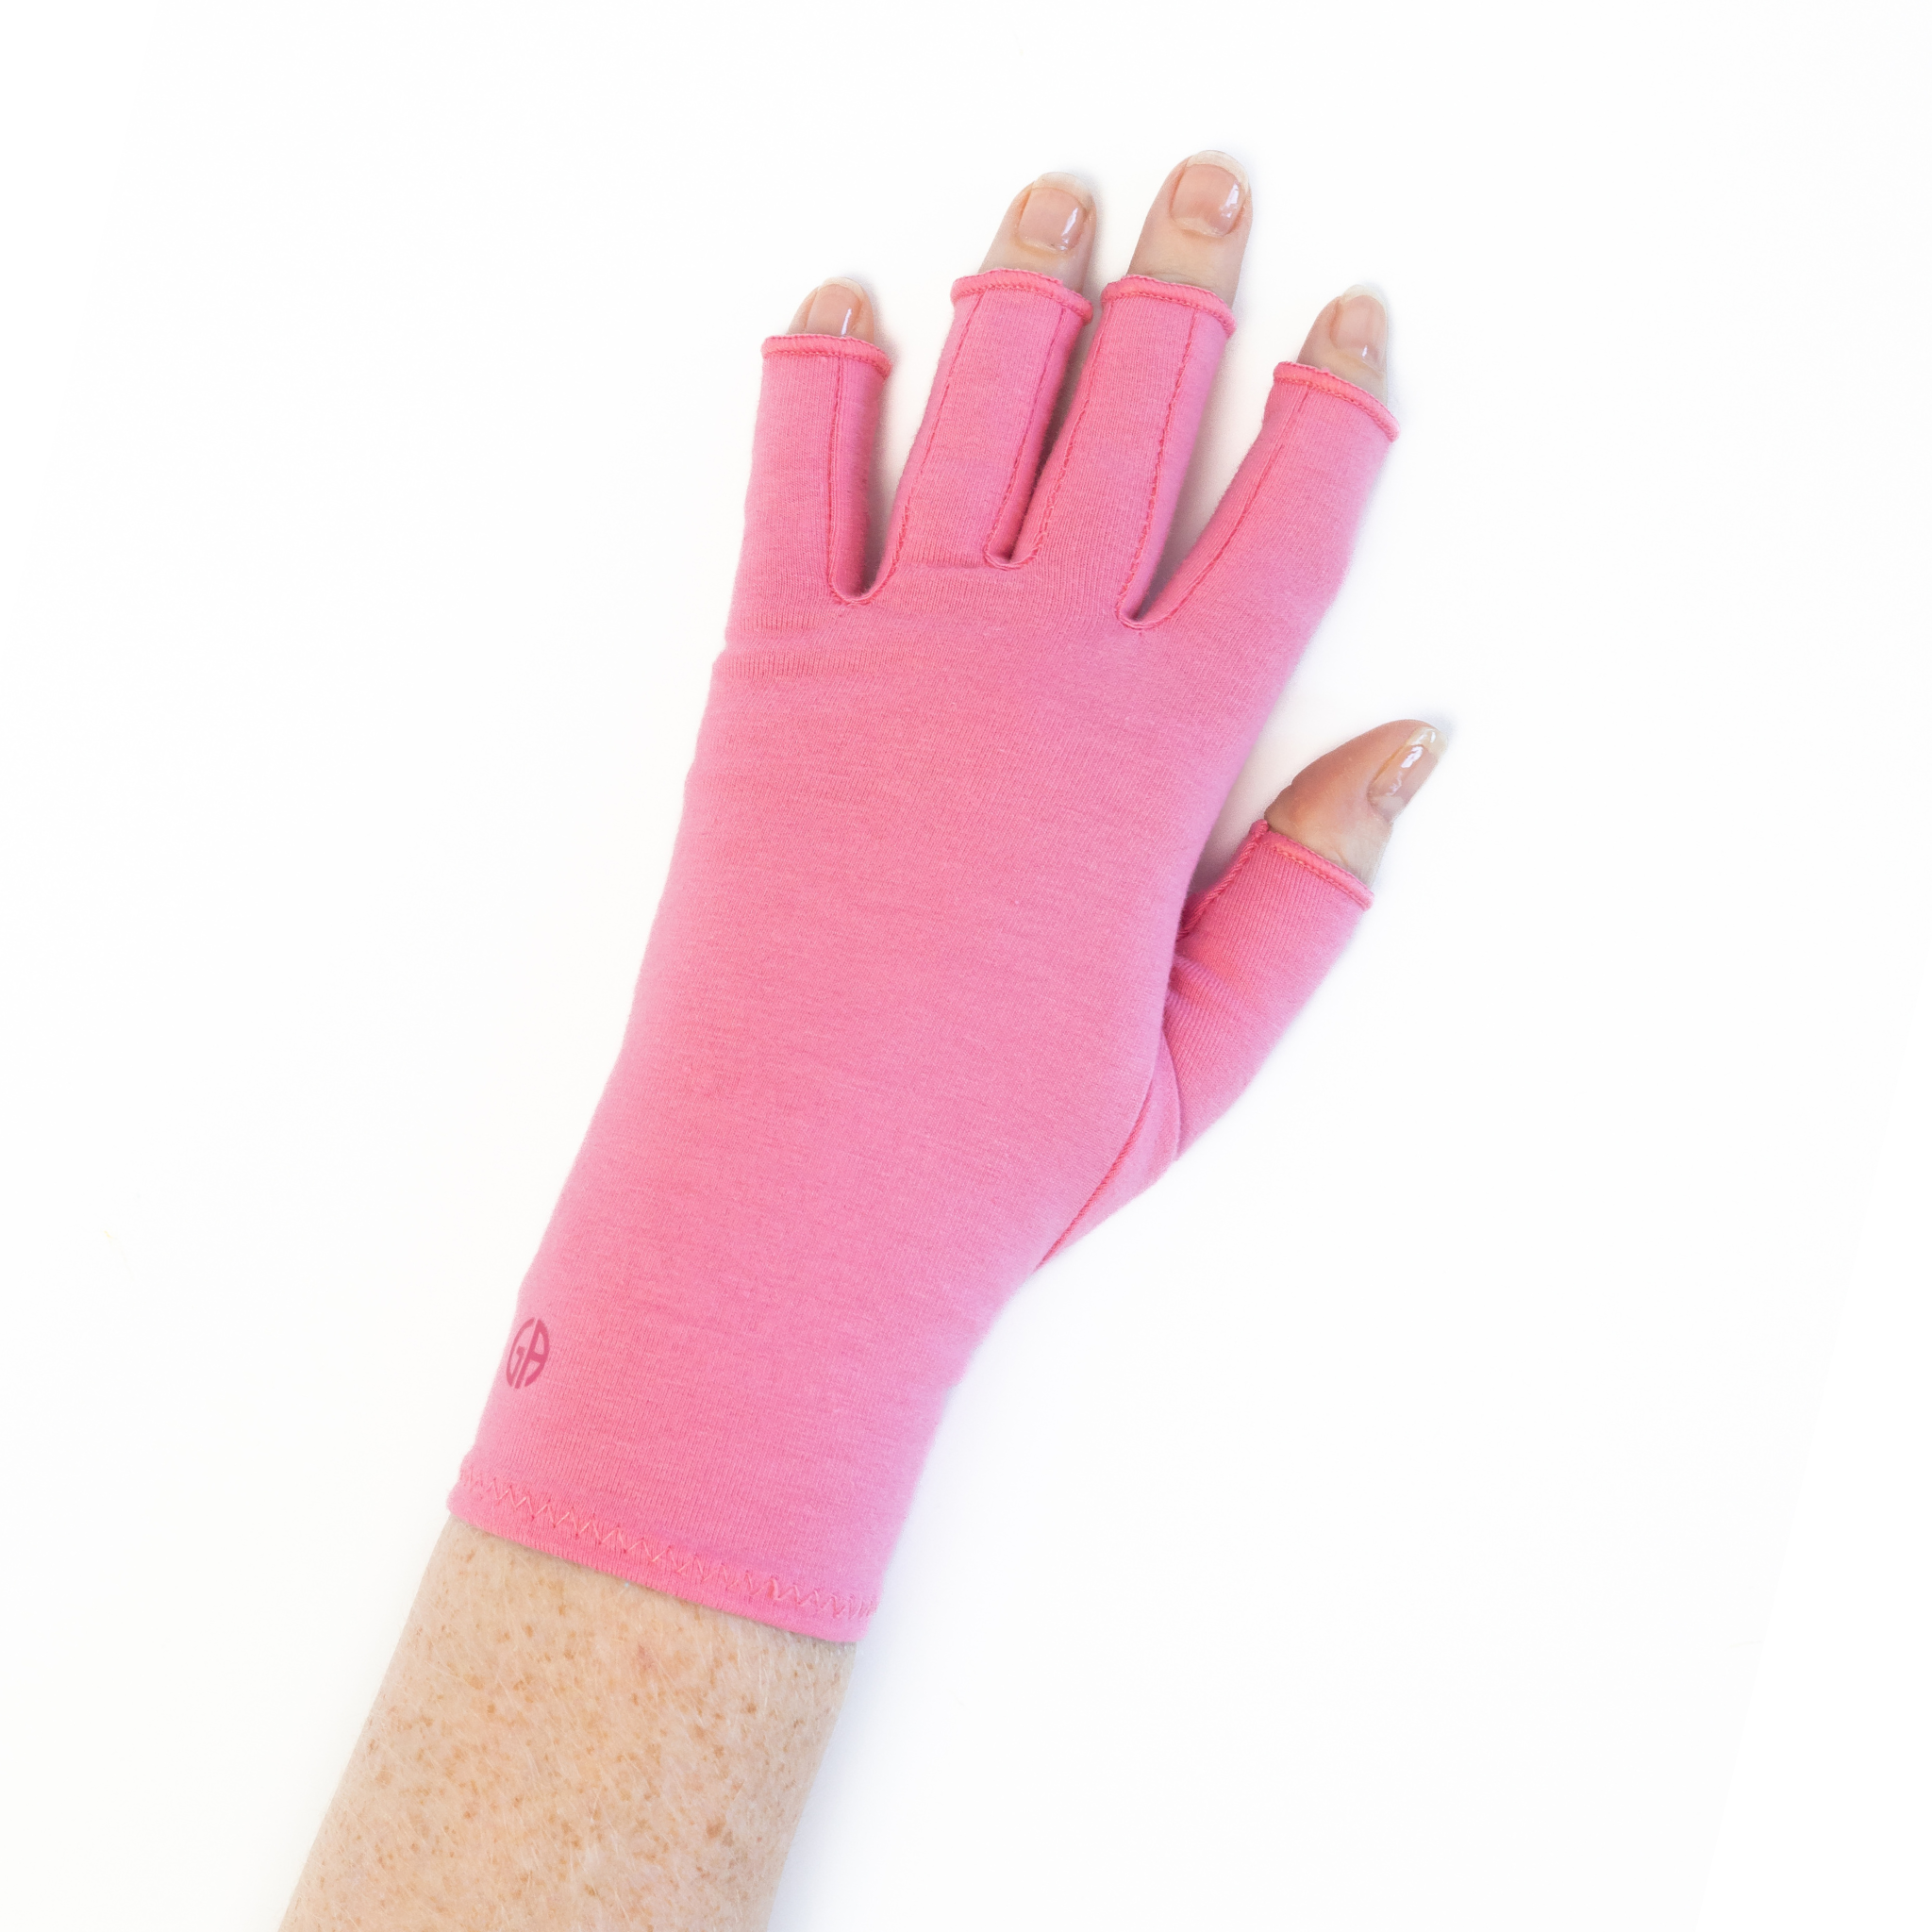 A close up of the hand of a woman with arthritis, wearing Coral Pink Compression Gloves and showing the back of her hand.